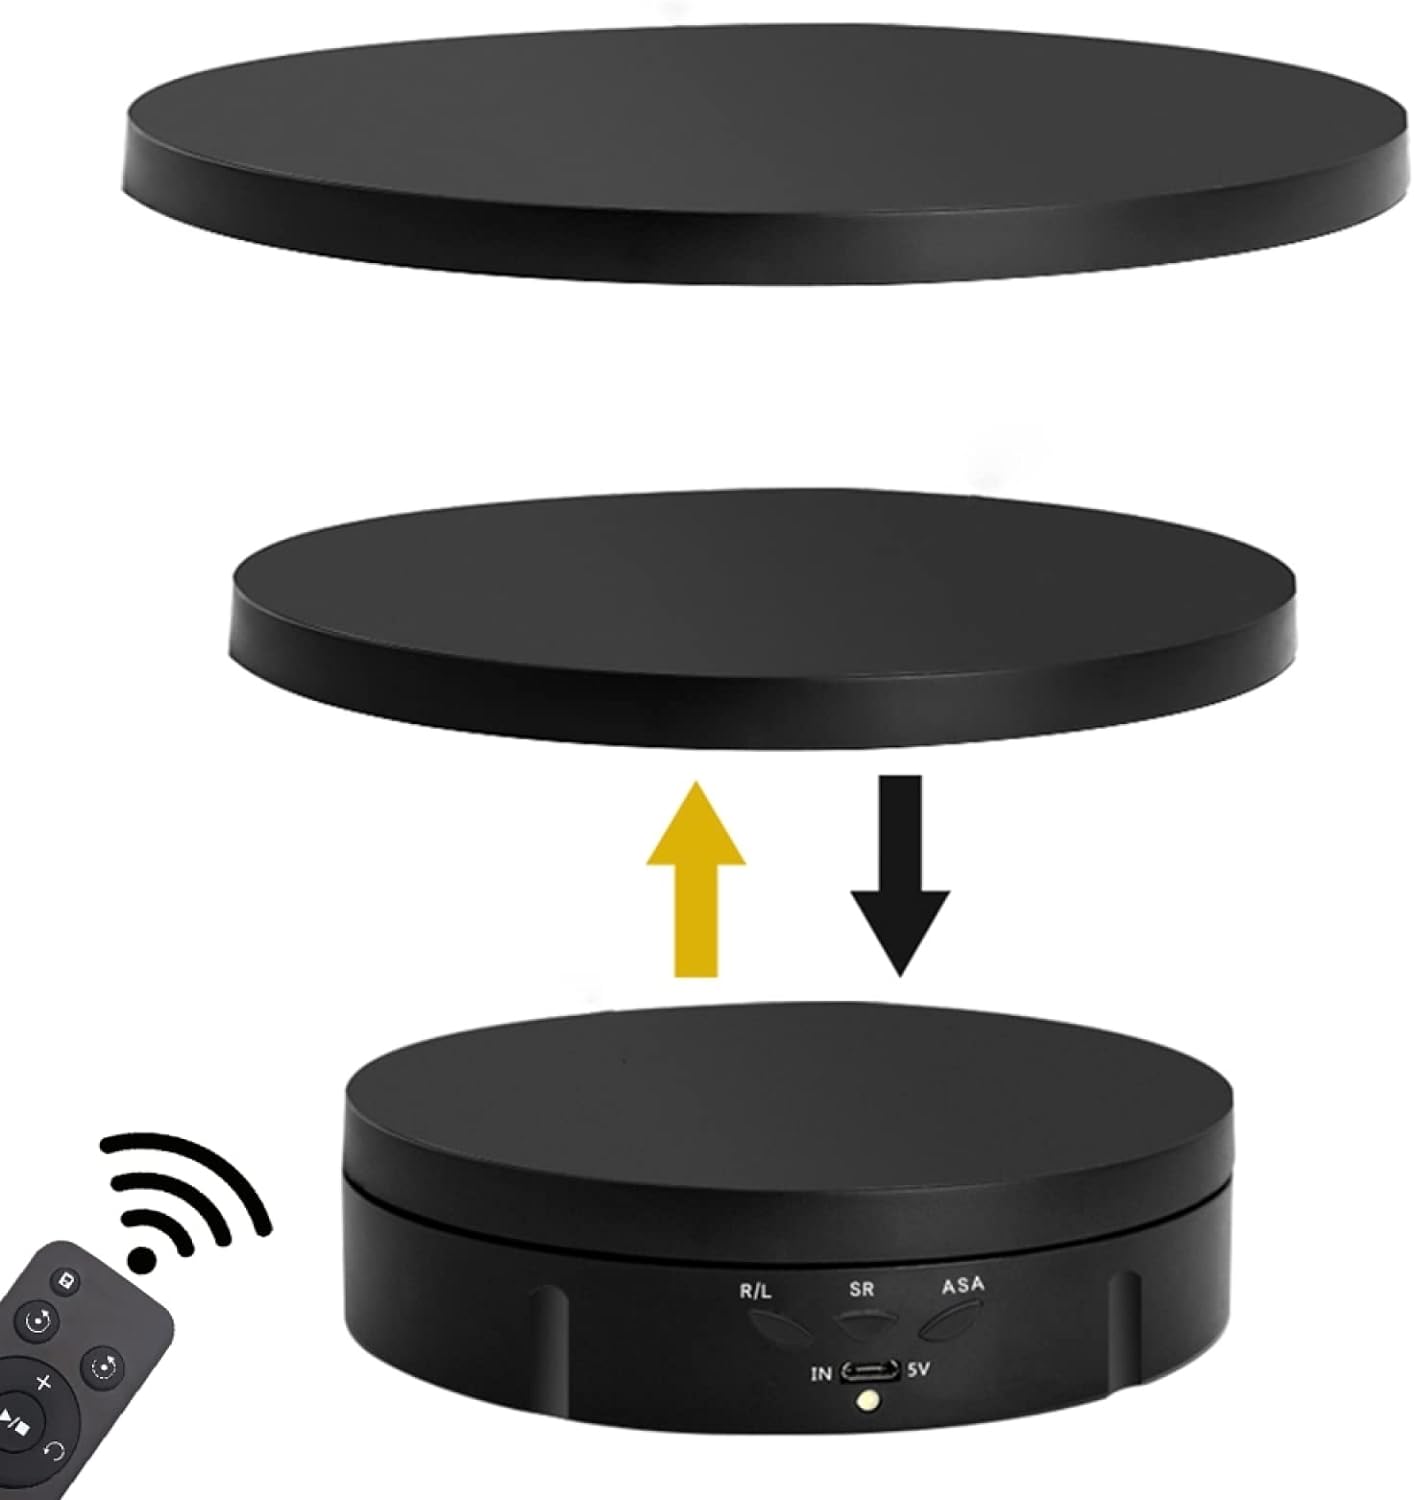 3 In 1 360 degree electric turntable - 1